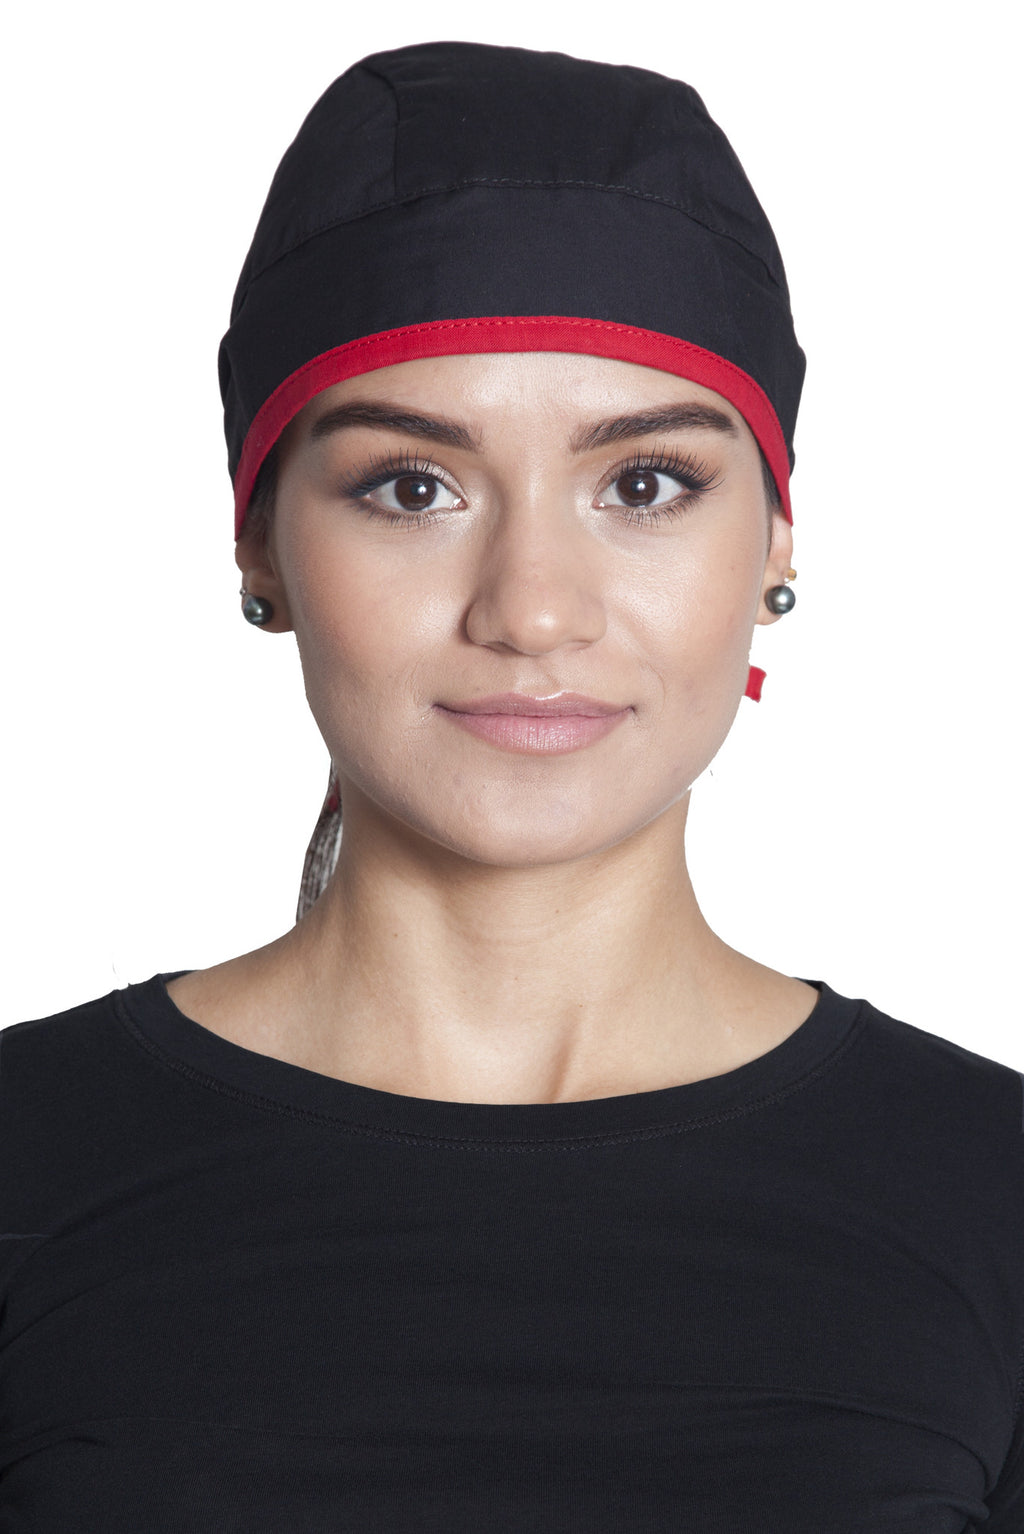 Fiumara Apparel Fitted Surgical Cap with Ties Front Black with Red Ties